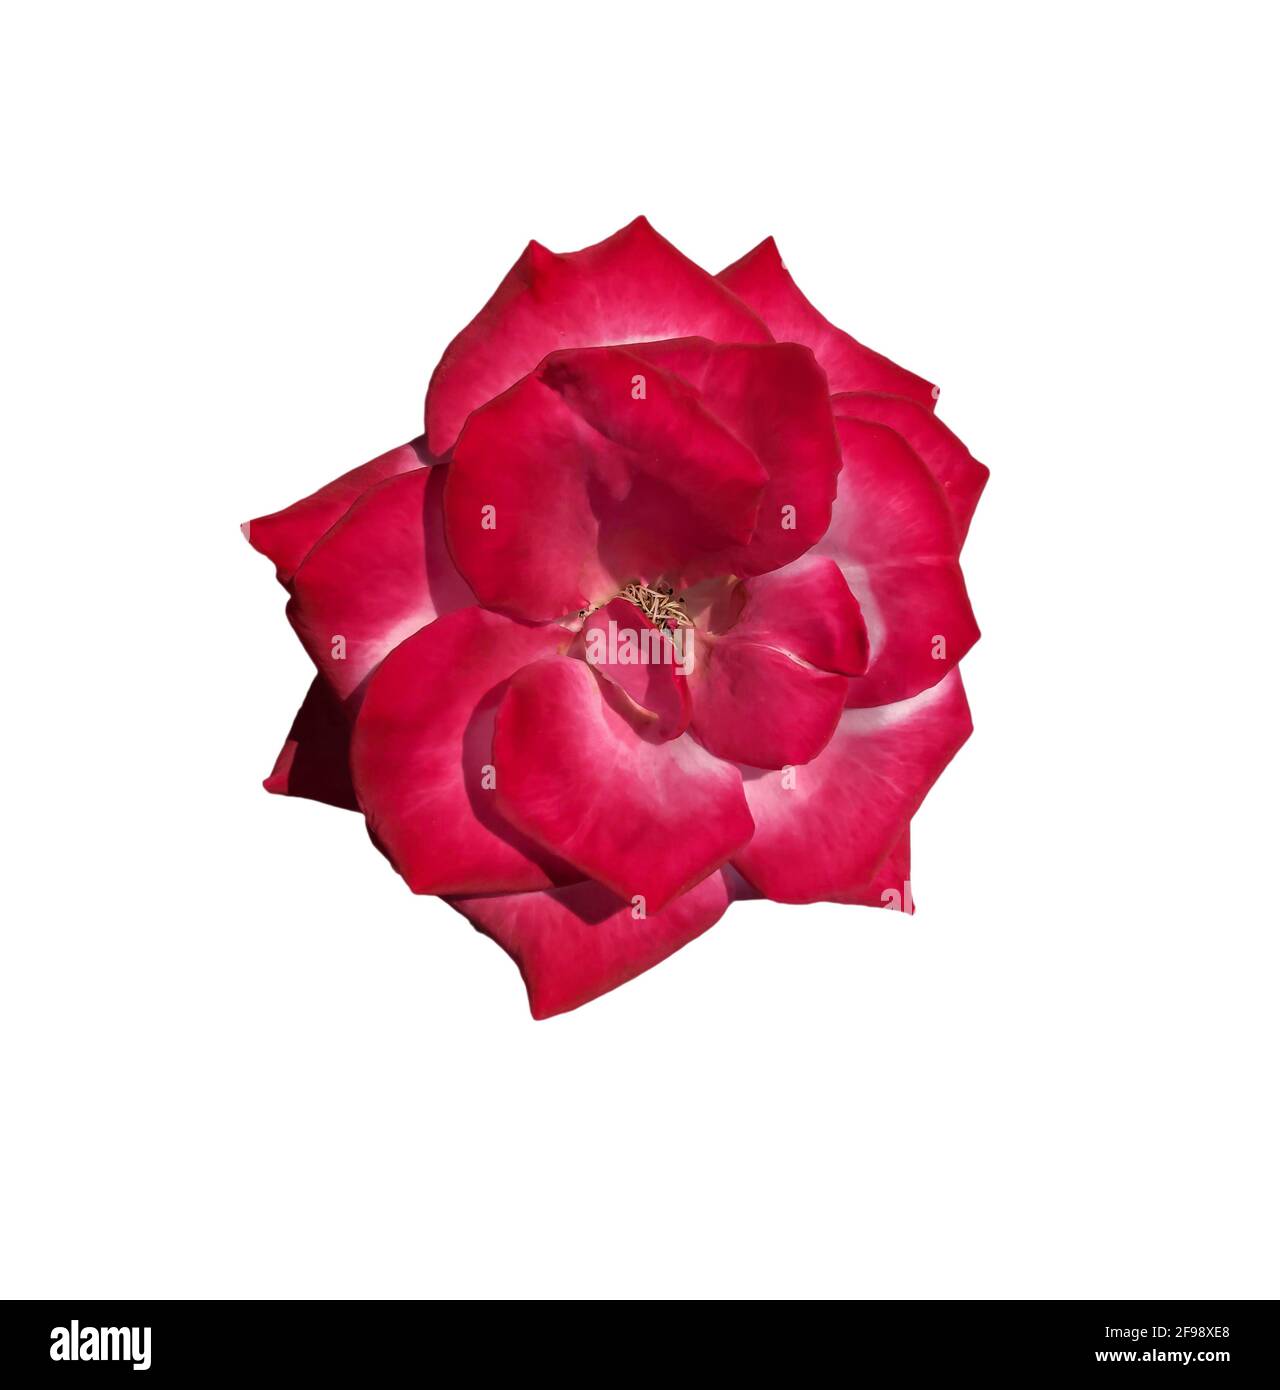 The roses are on a white background that can be used to make cards or compose images. Stock Photo